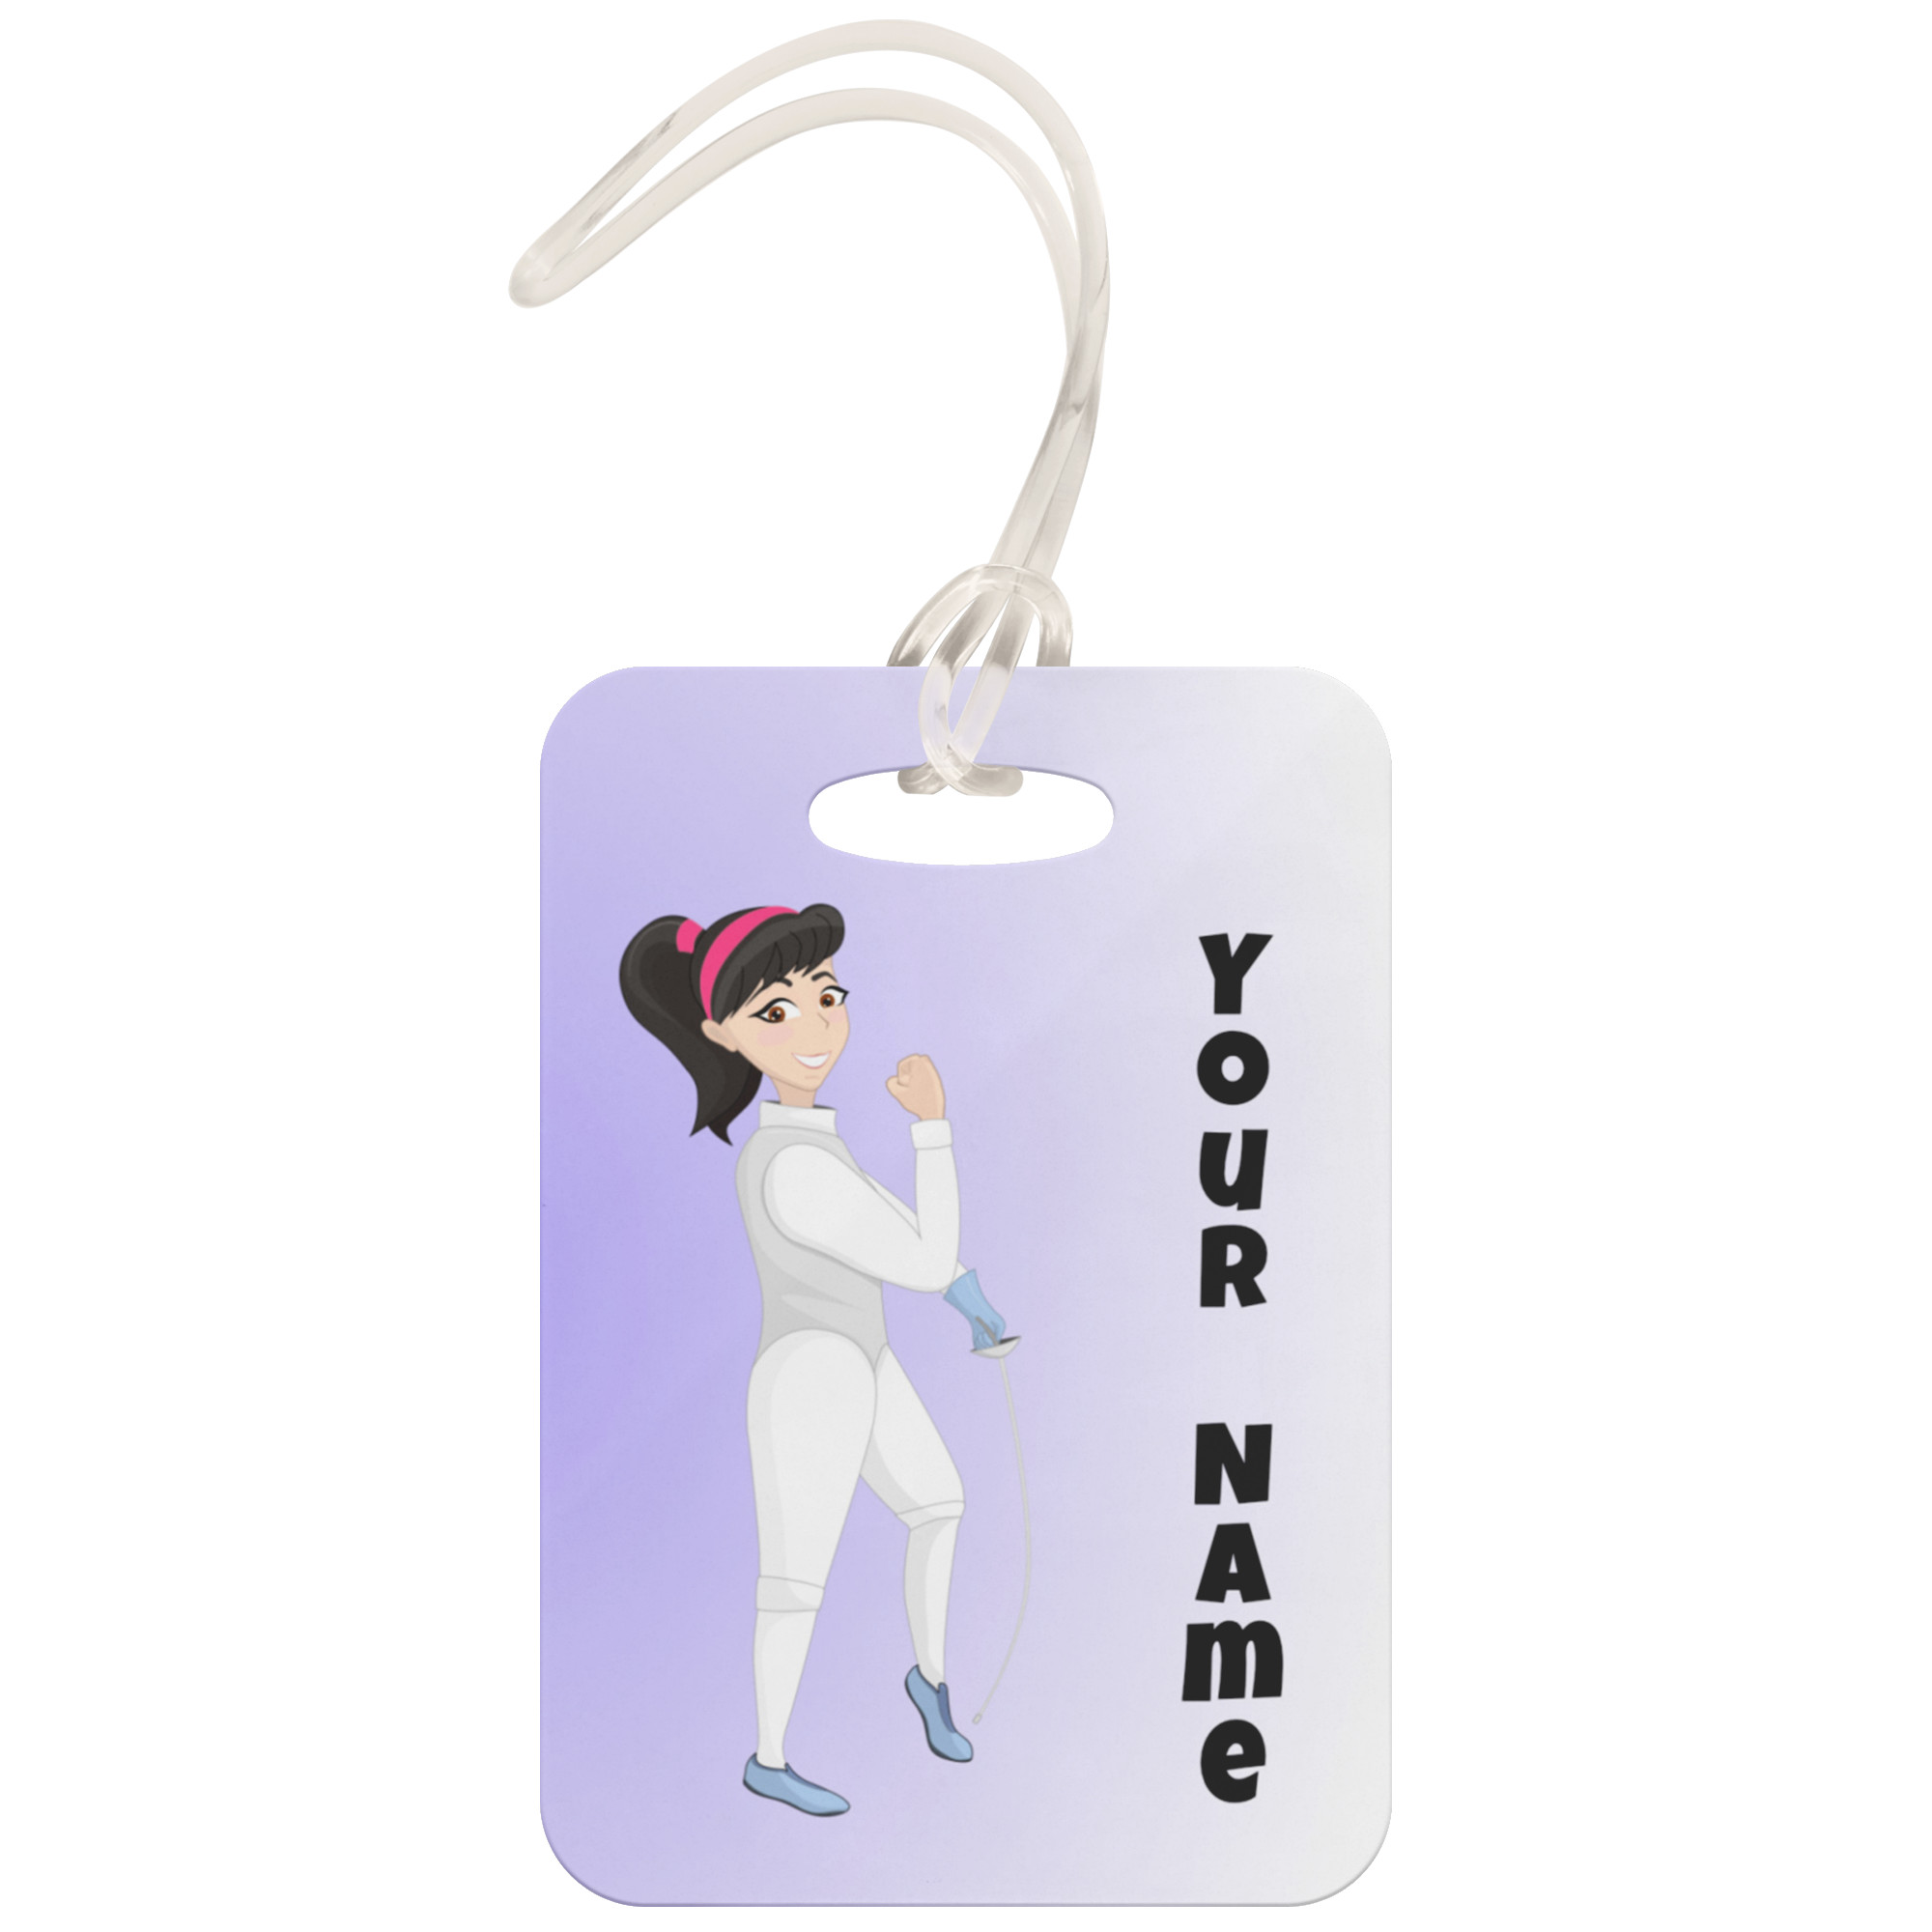 Foil Fencing Girl Water Bottle - Personalized Fencer's Gift